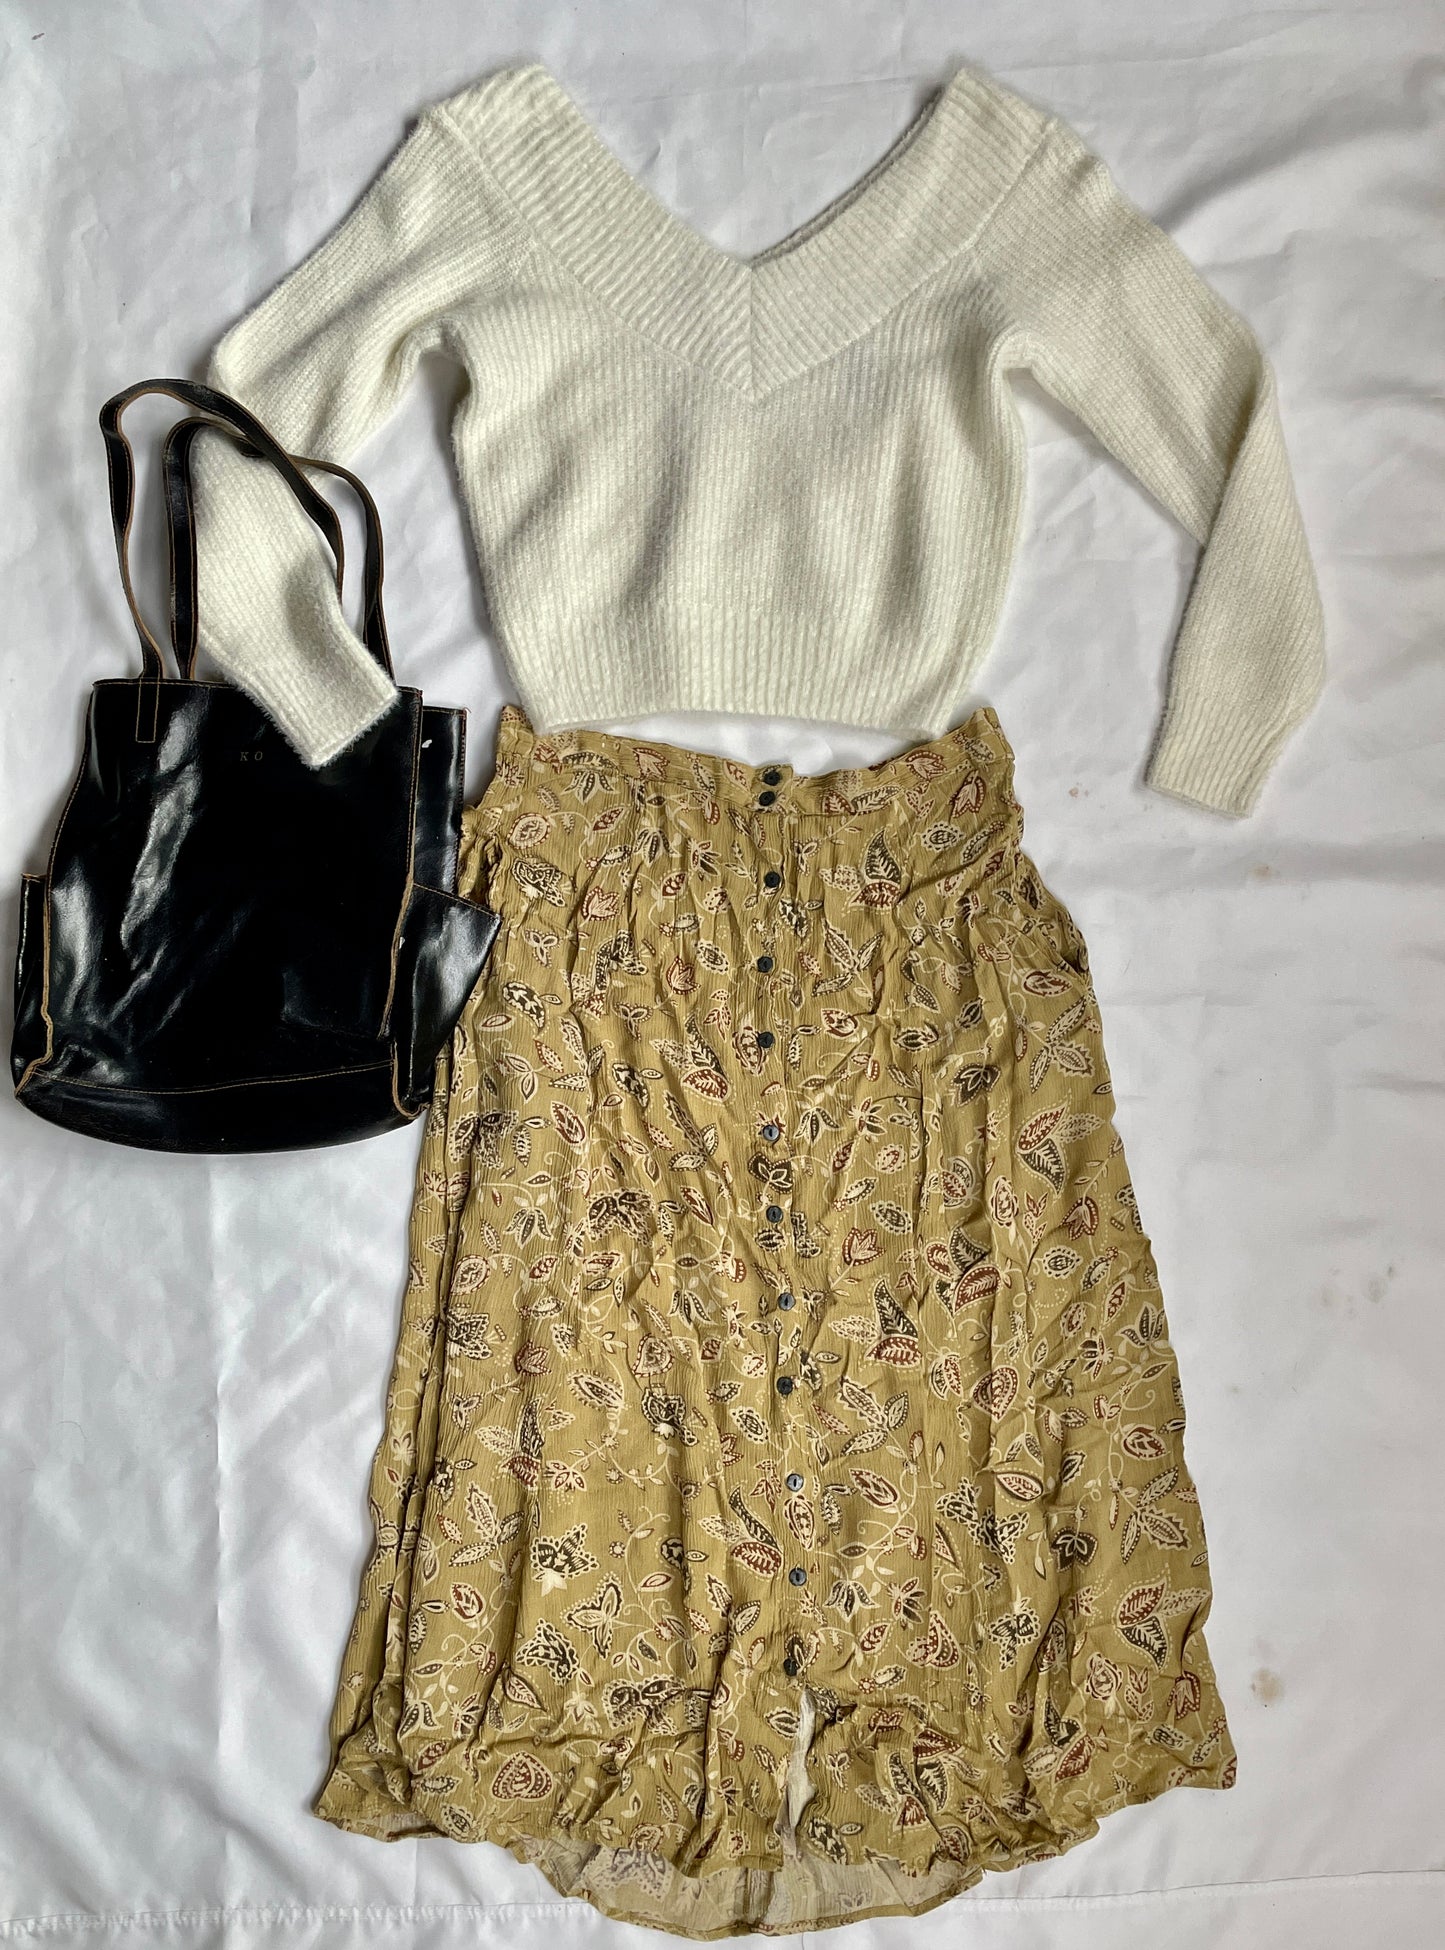 FALL inspired outfit bundle - long skirt + sweater + bag